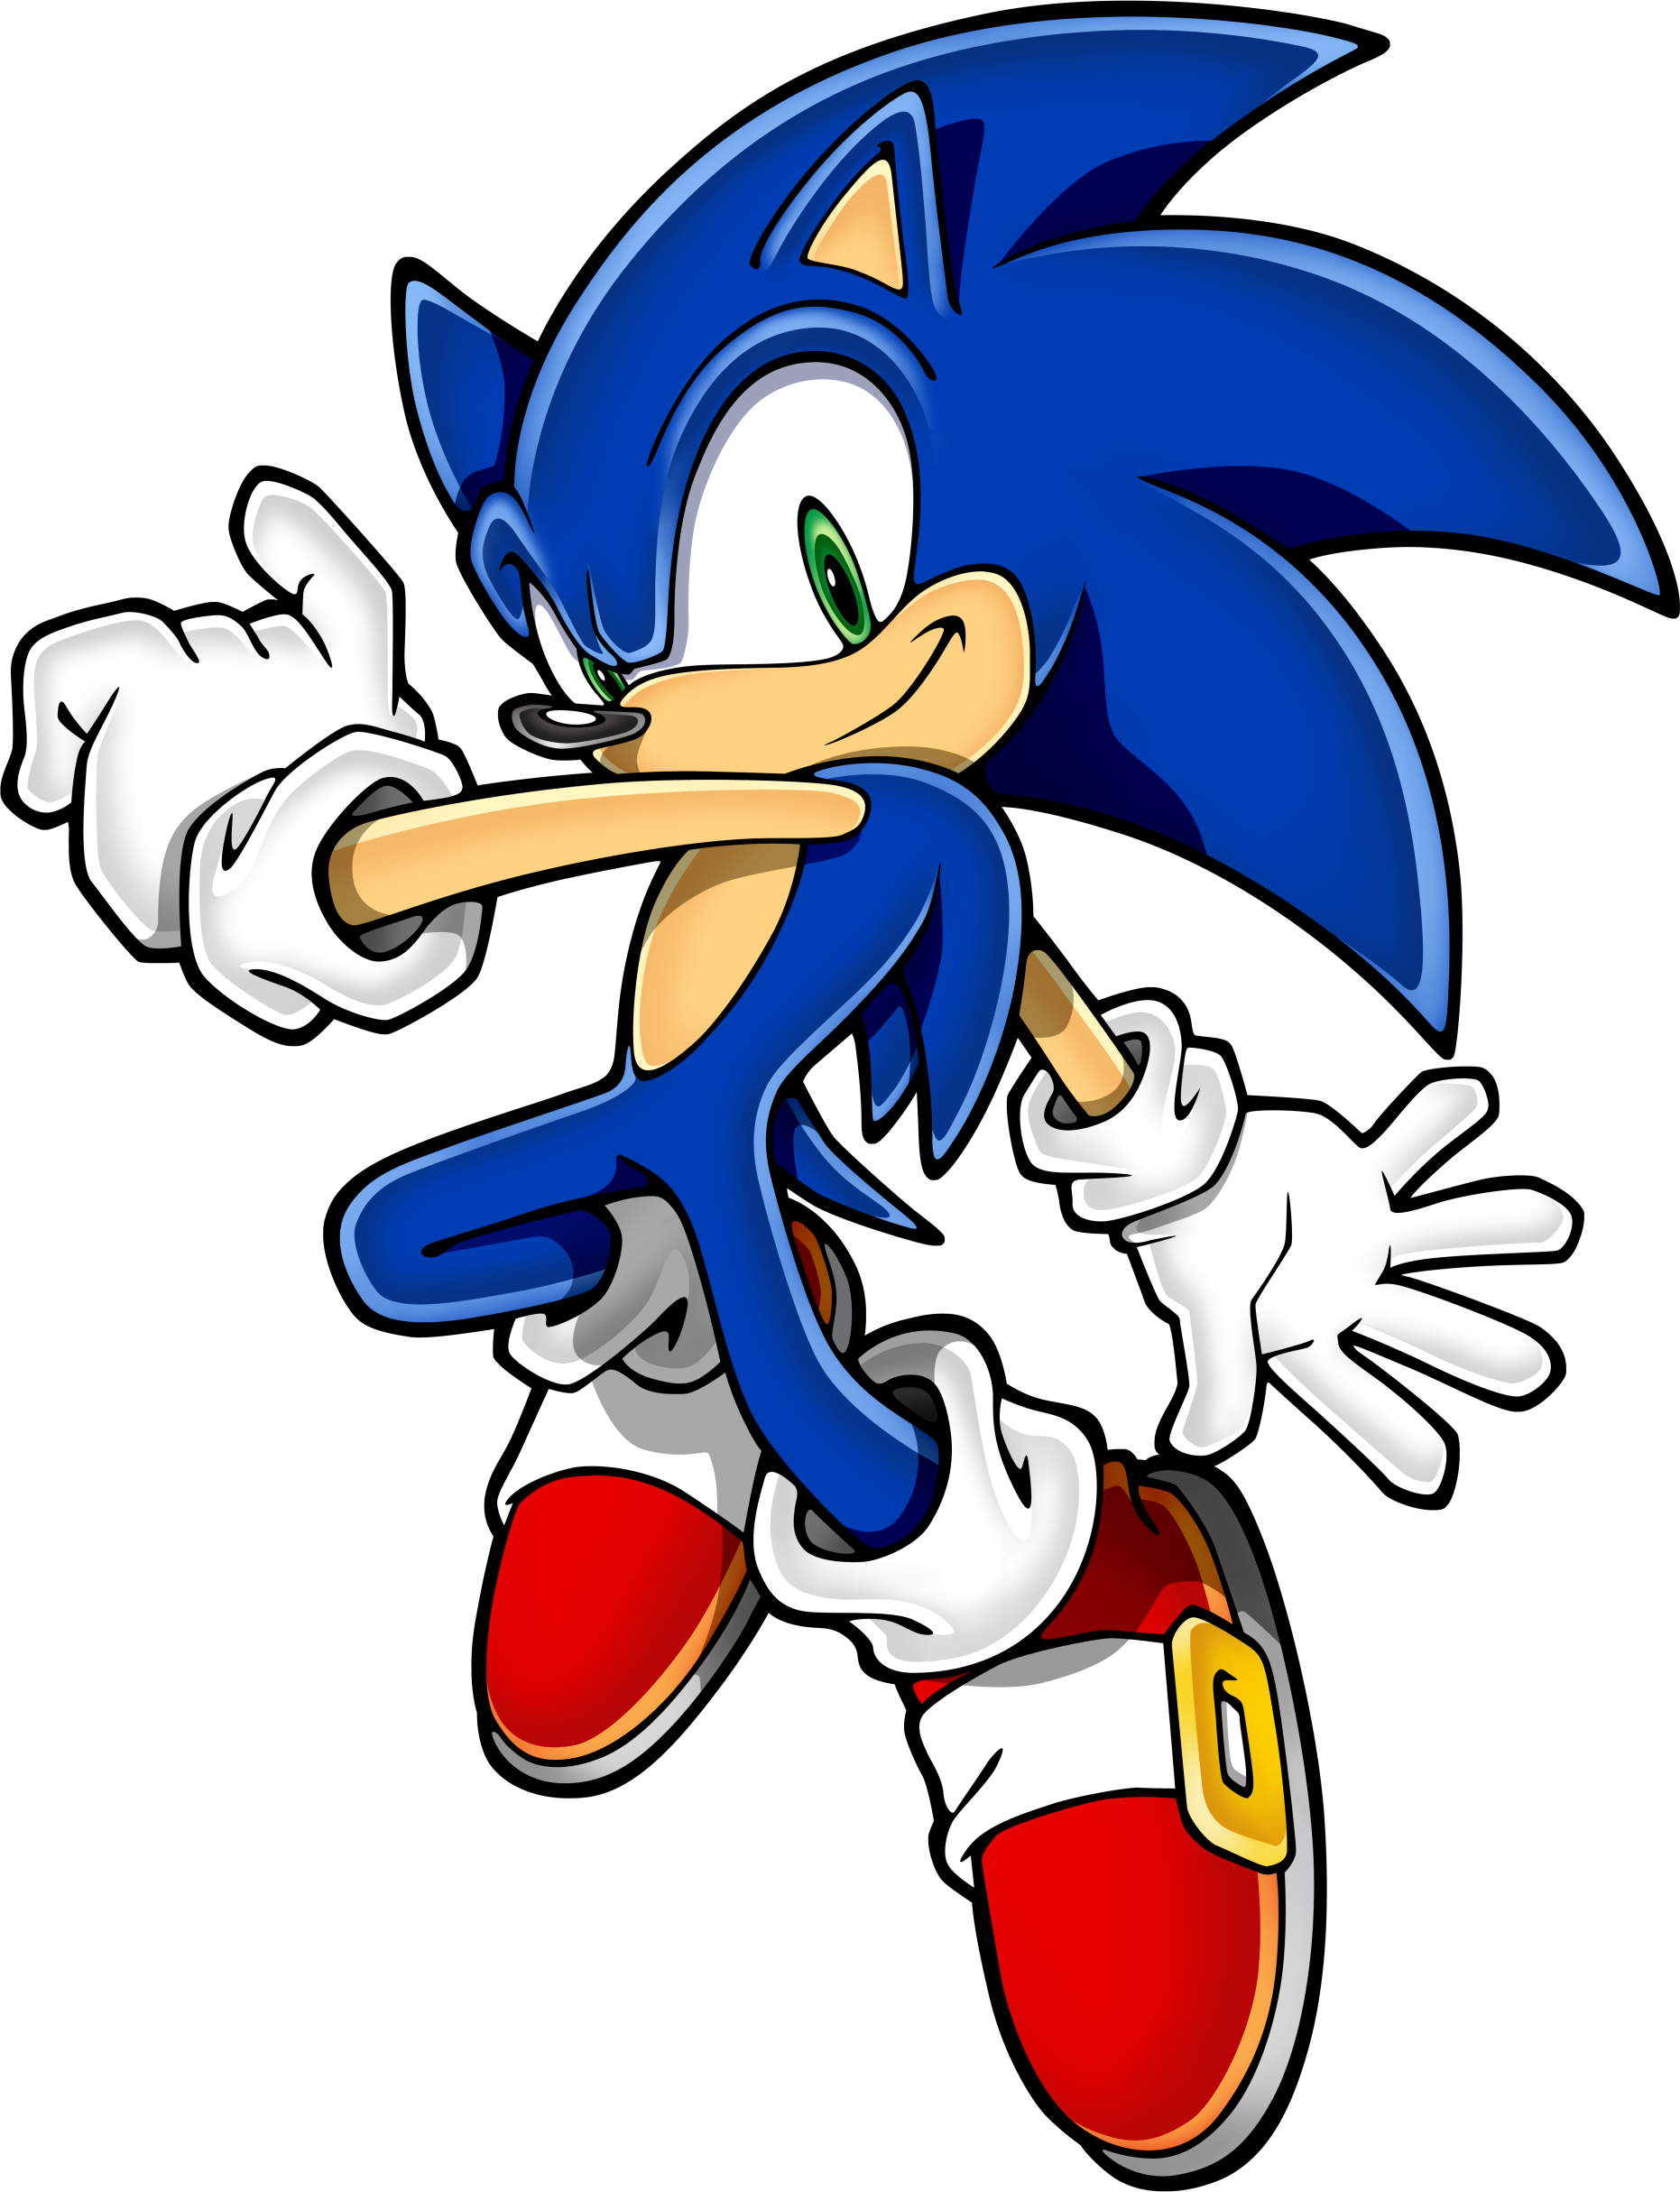 Download Sonic The Hedgehog P